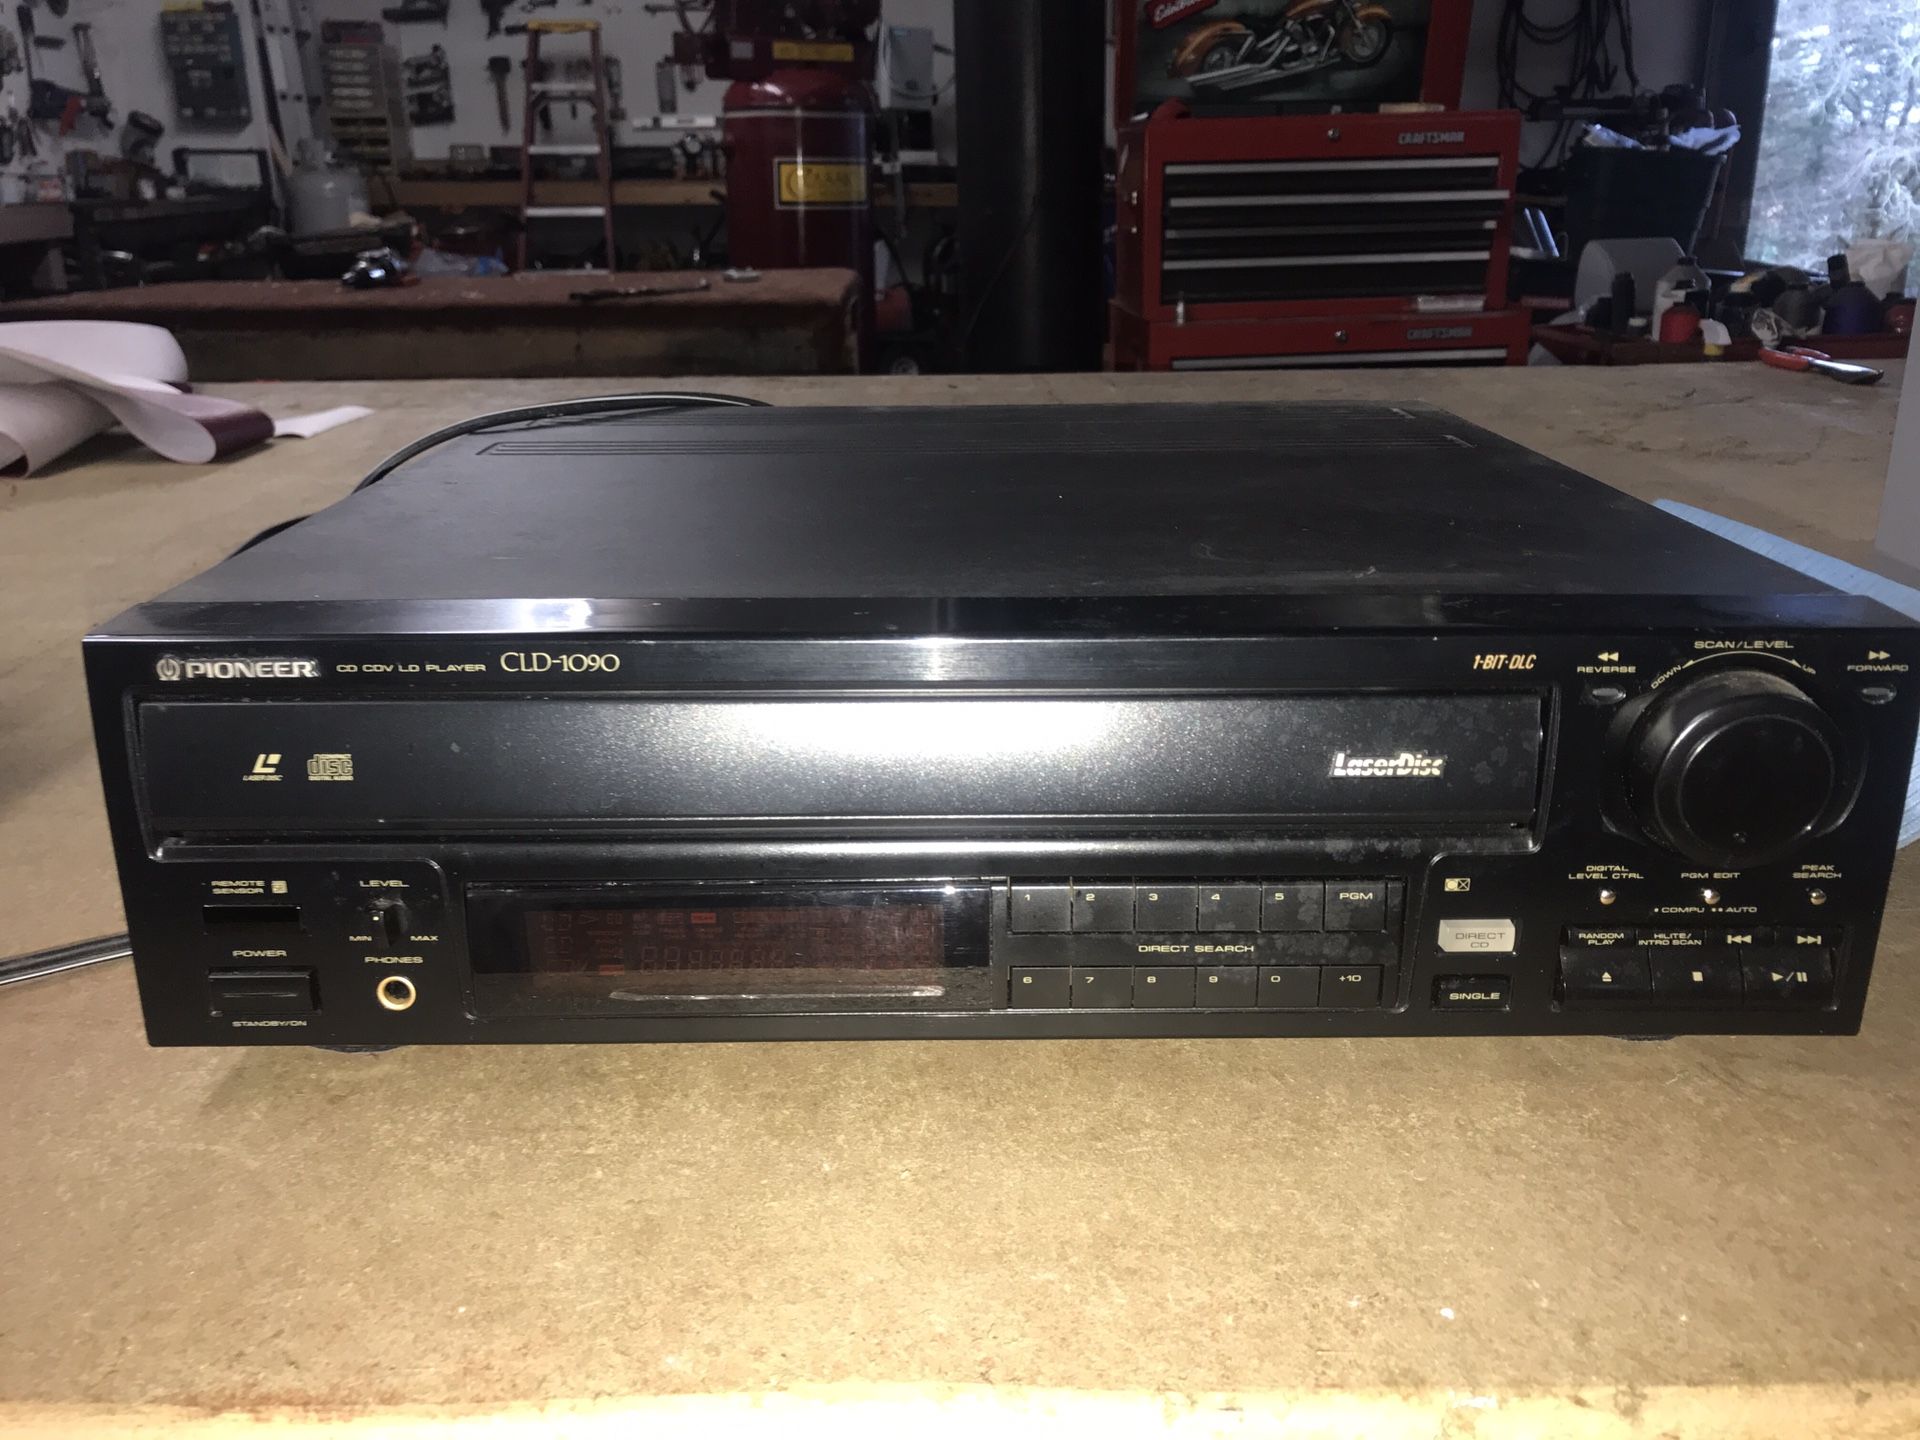 Pioneer laser disc player will play the big 12” laser disc also the smaller ones and regular cds